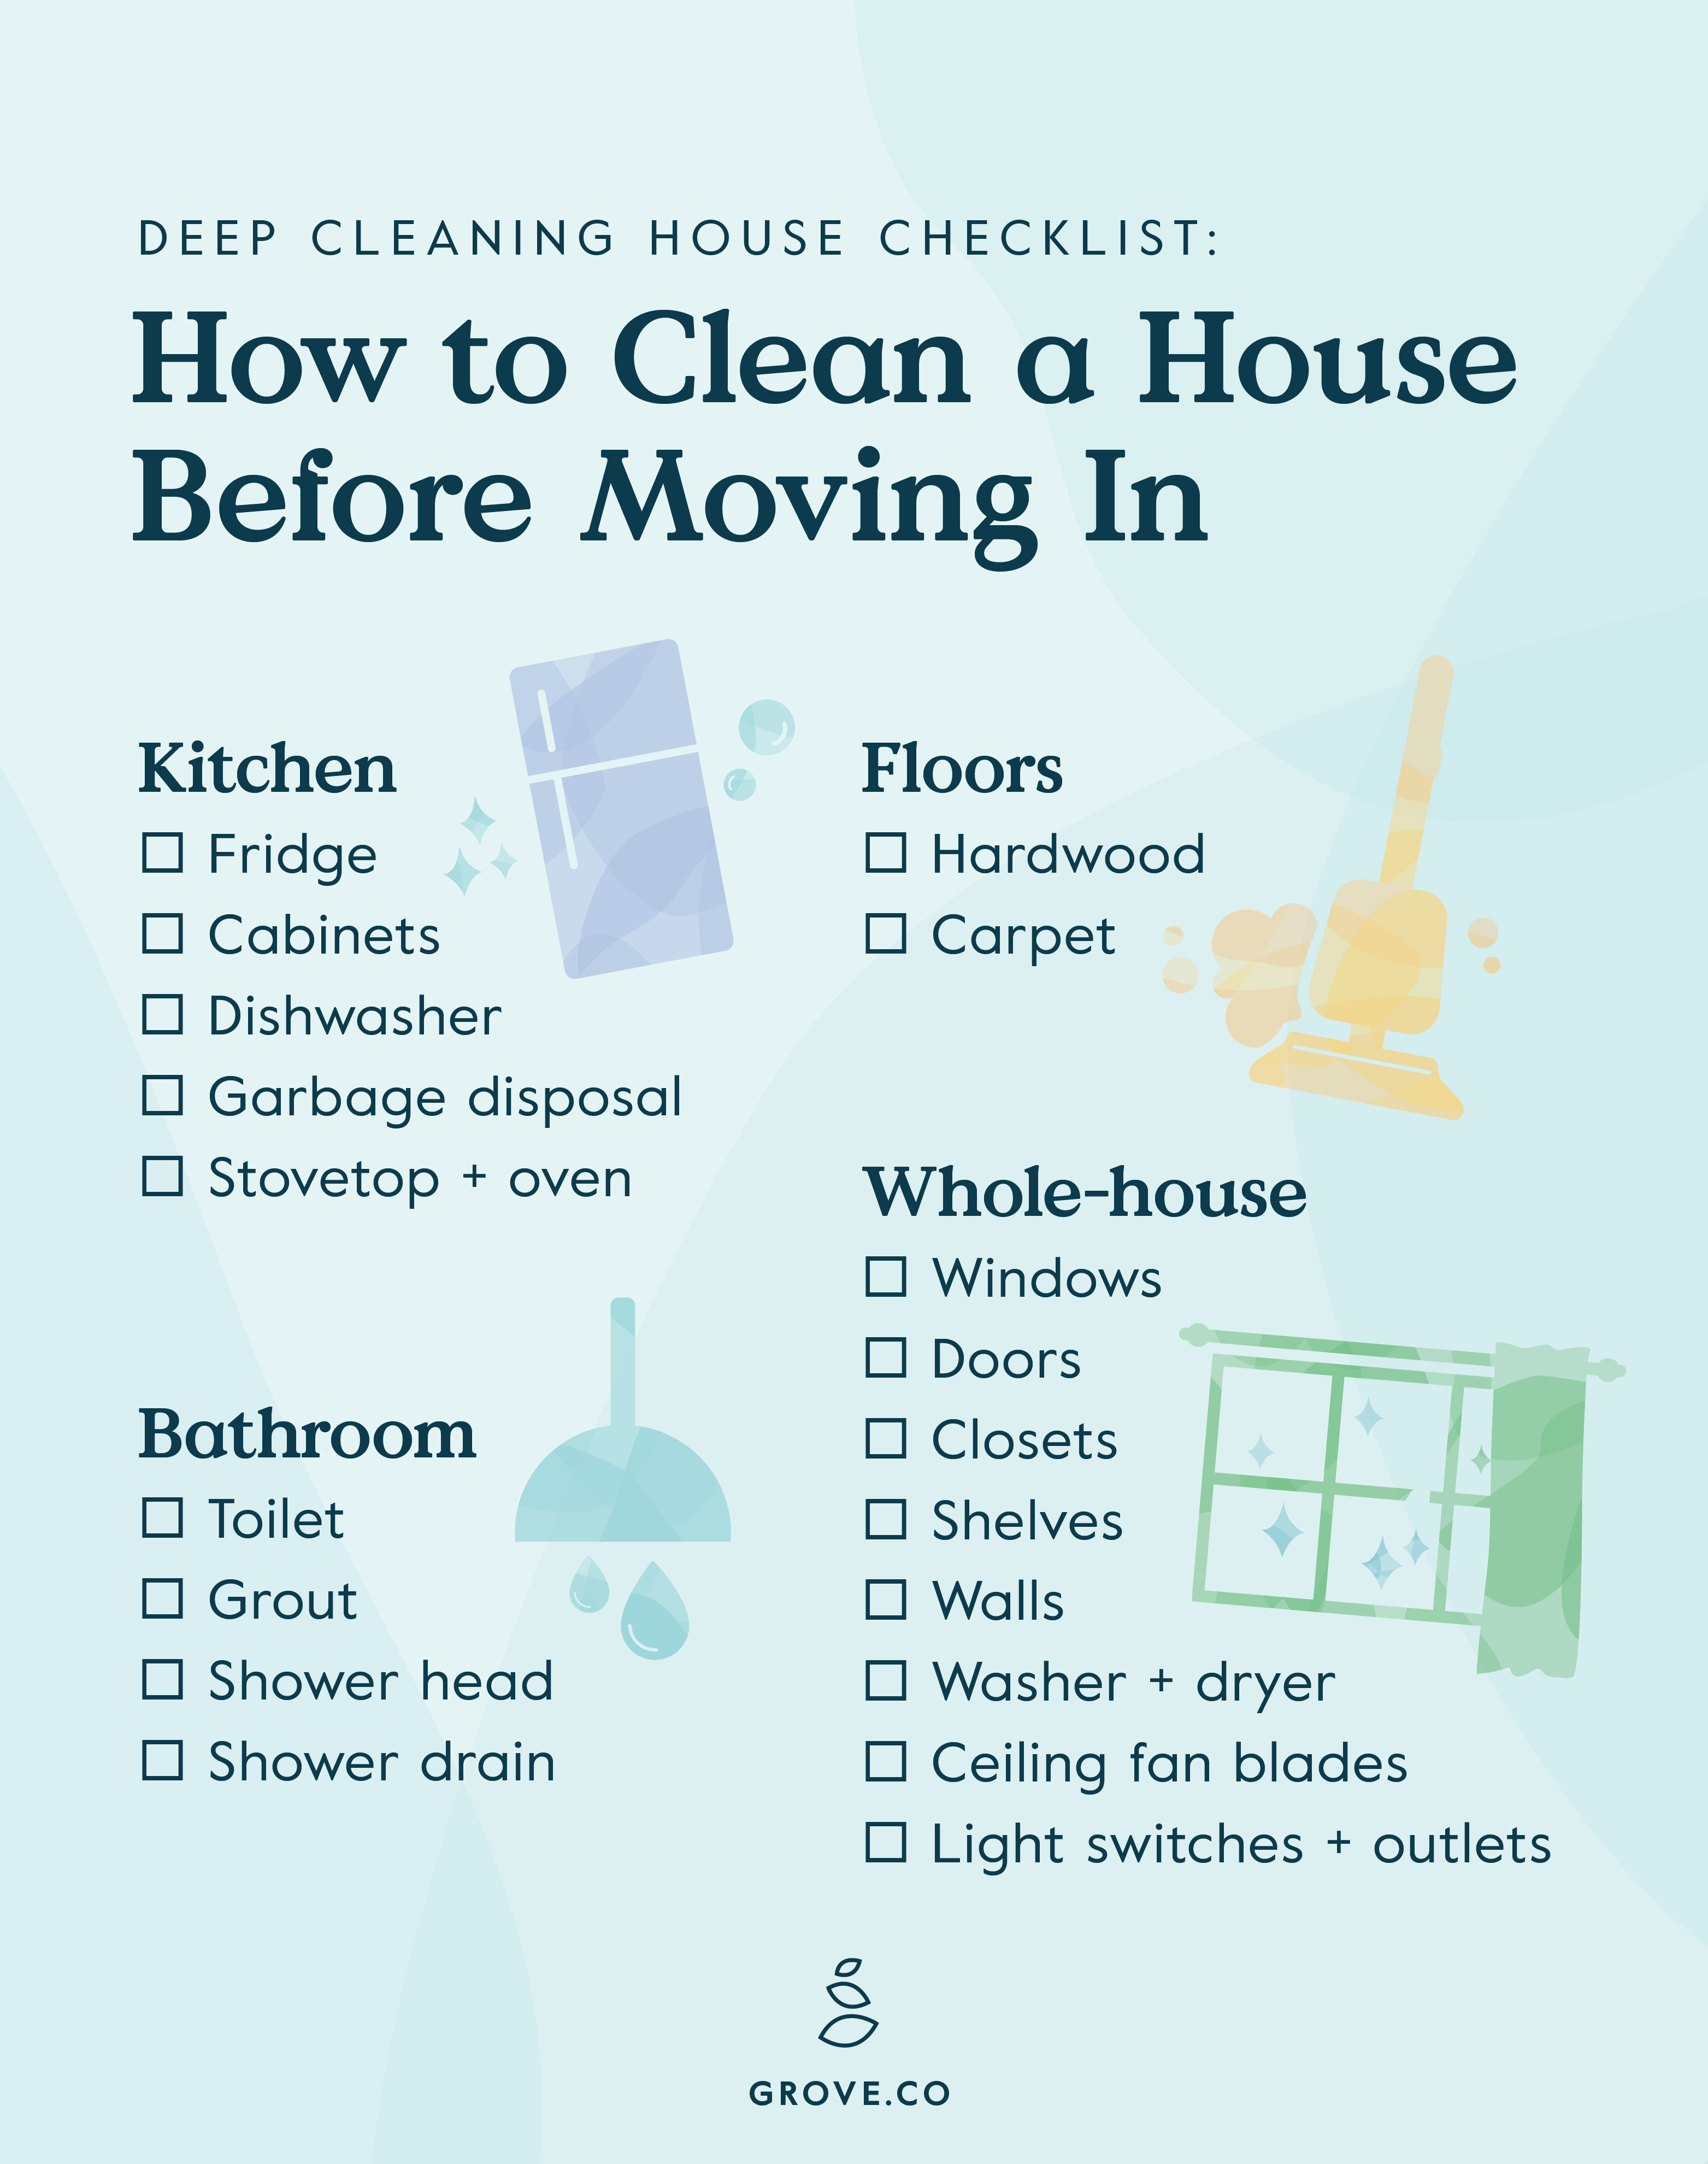 cleaning services for homes